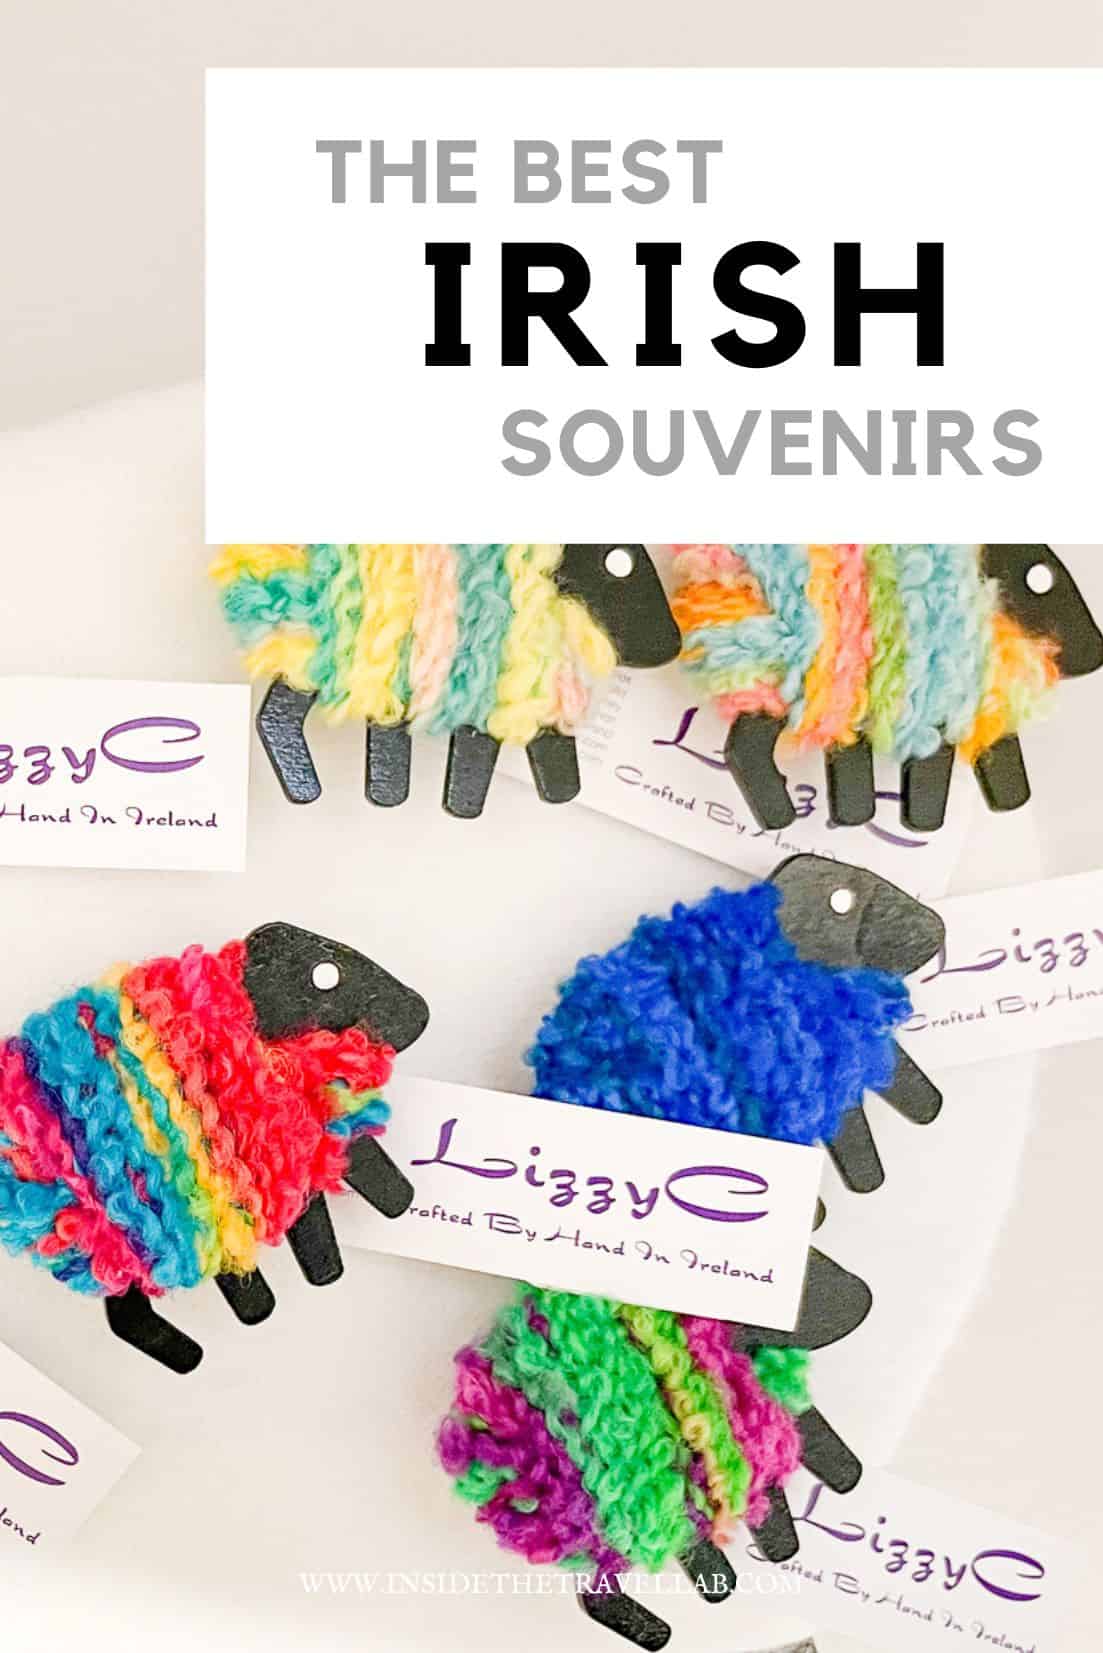 The Best Souvenirs in Ireland - Irish Souvenir Gift Guide what to buy in Ireland cover image